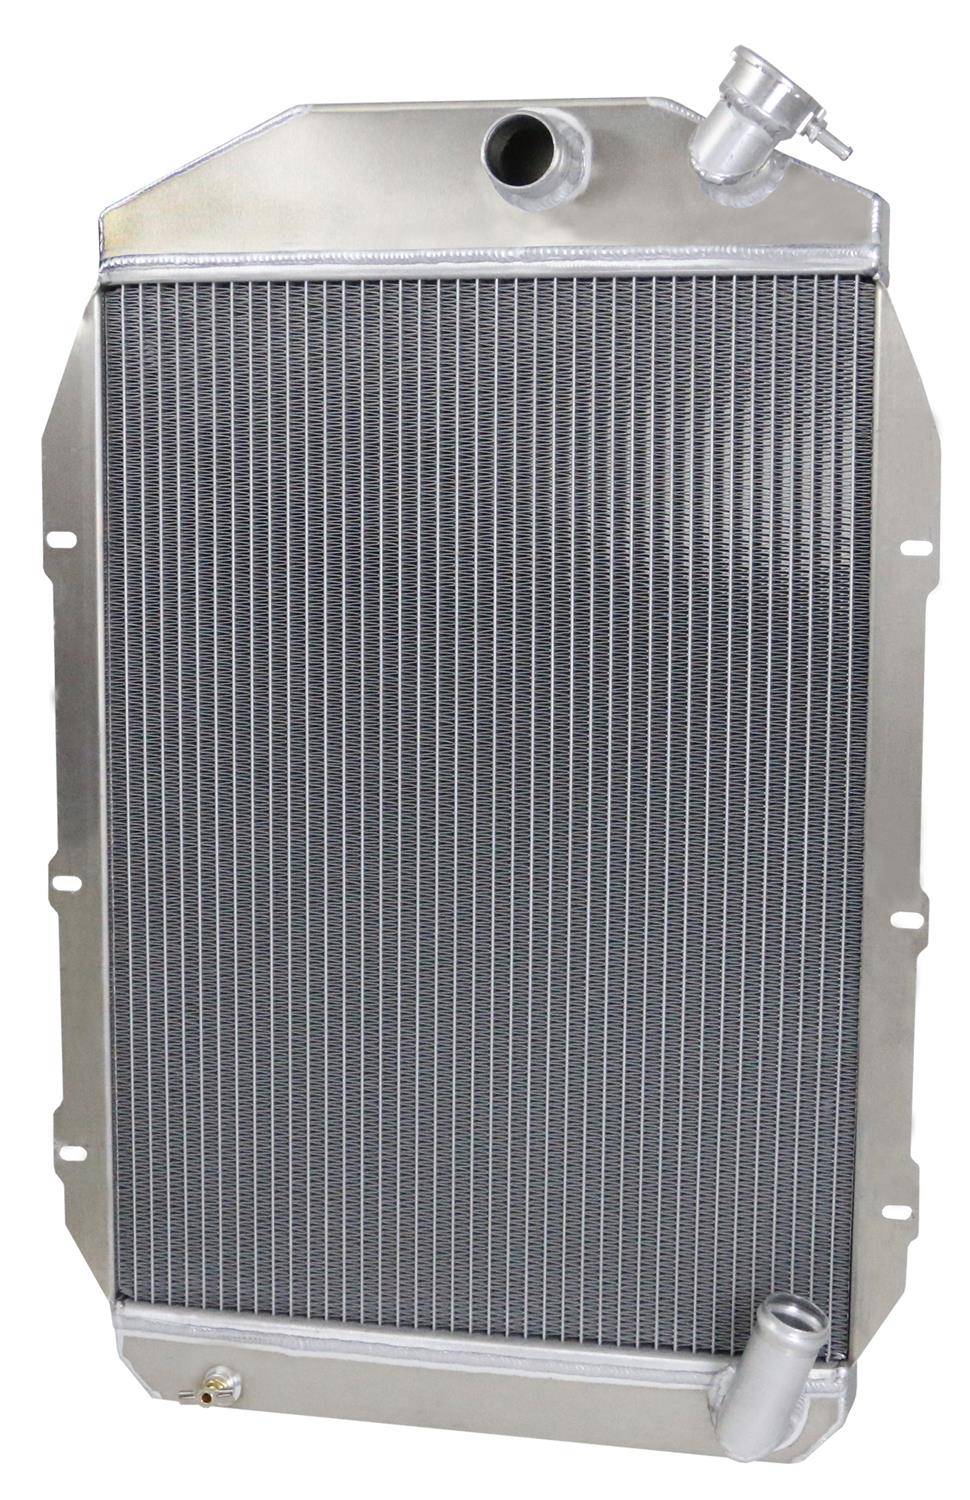 Wizard Cooling Inc - Wizard Cooling - 1939 Buick Special Aluminum Radiator (Straight 8 Motor) - 10498-500